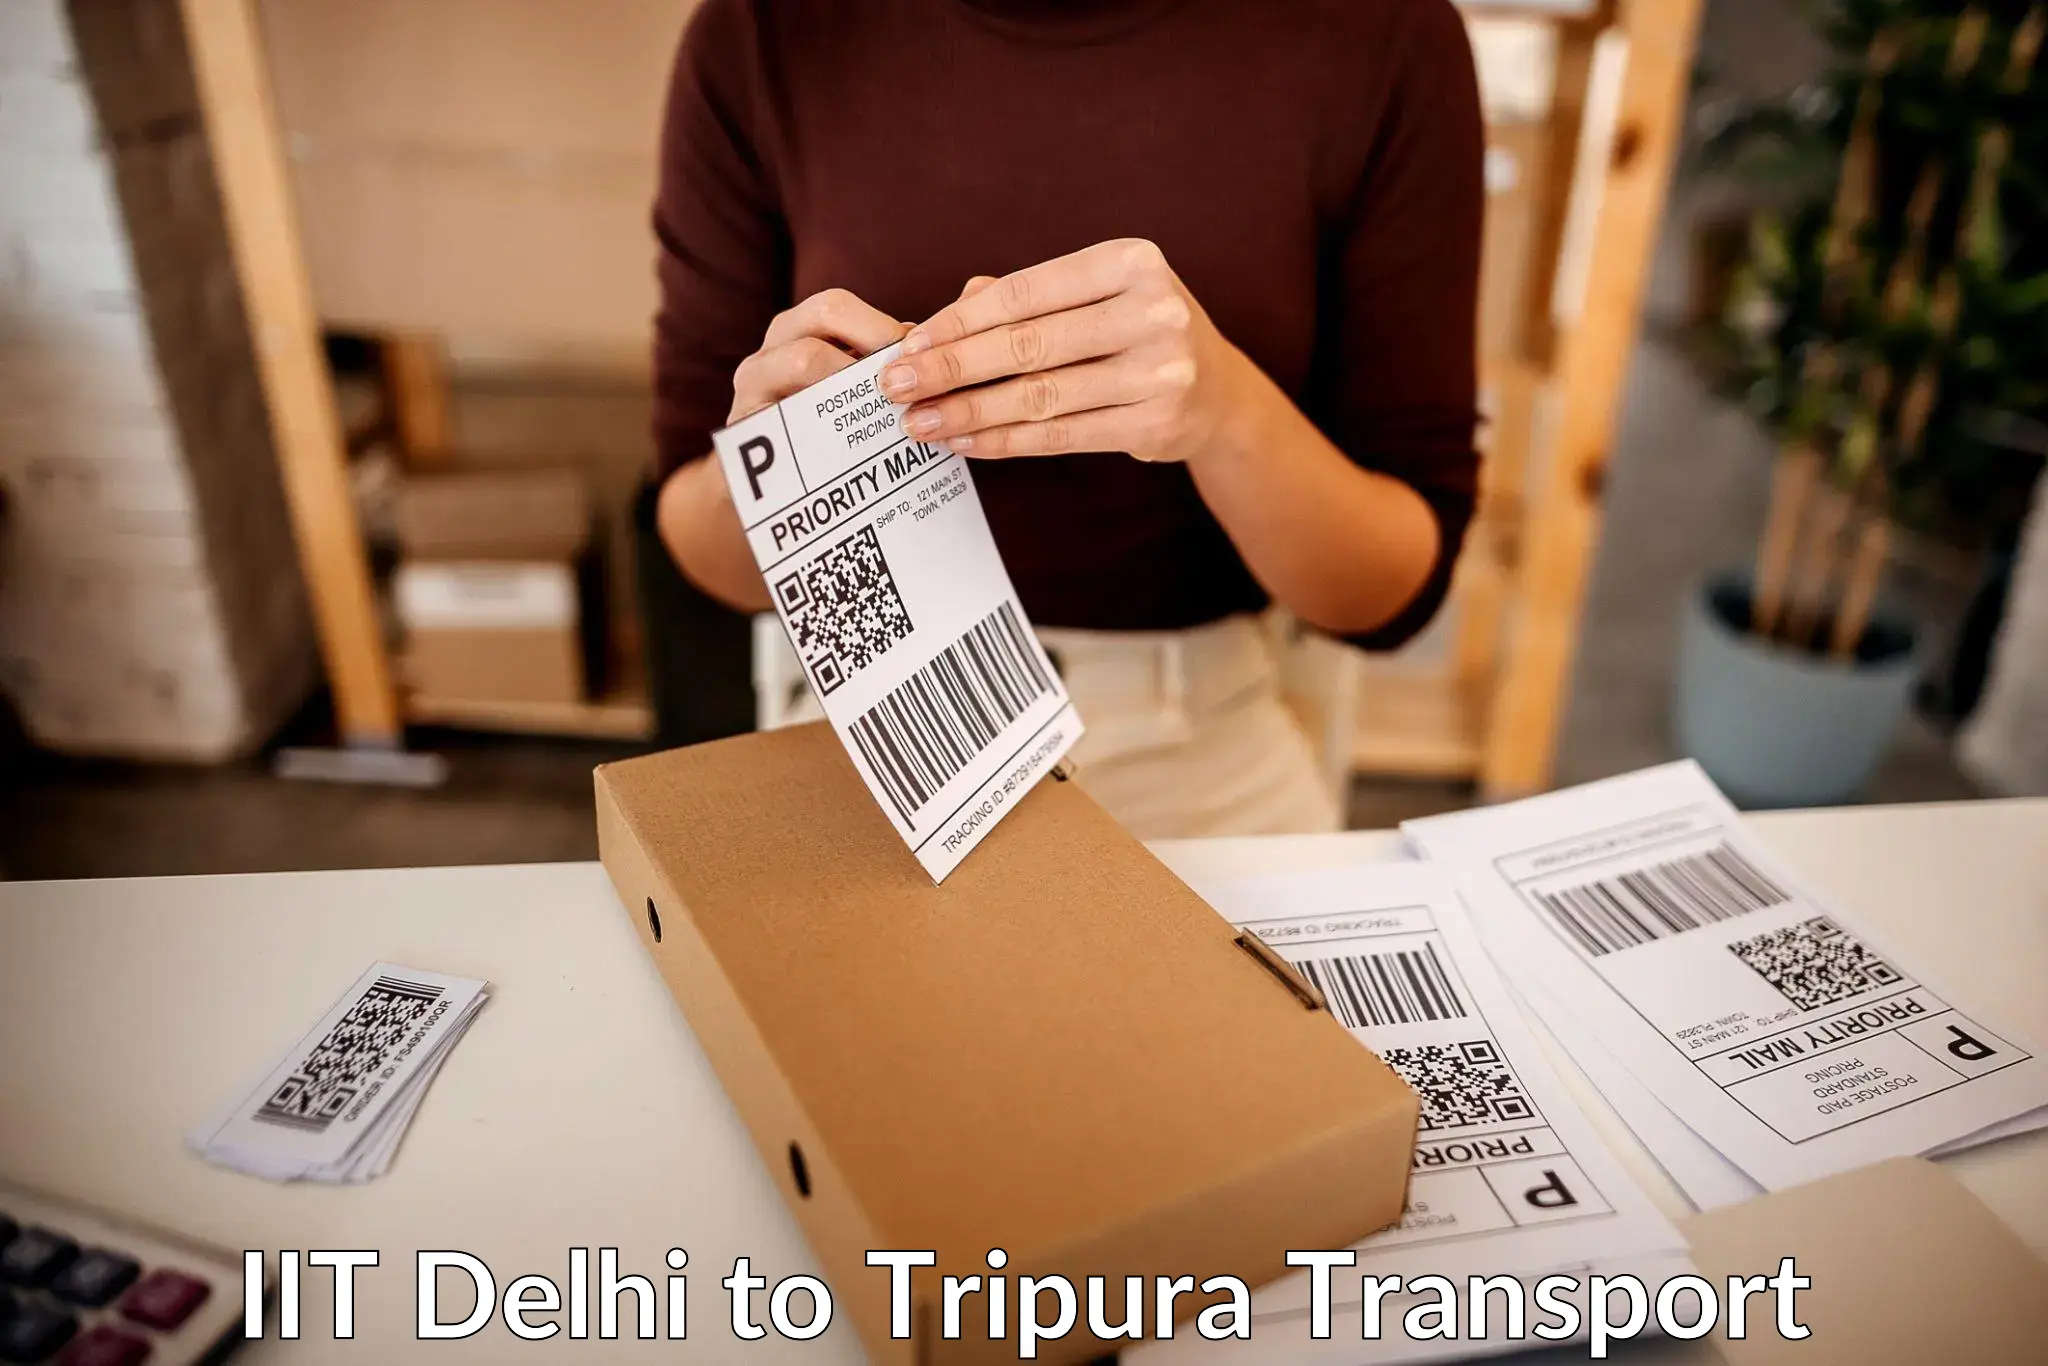 Daily parcel service transport IIT Delhi to South Tripura